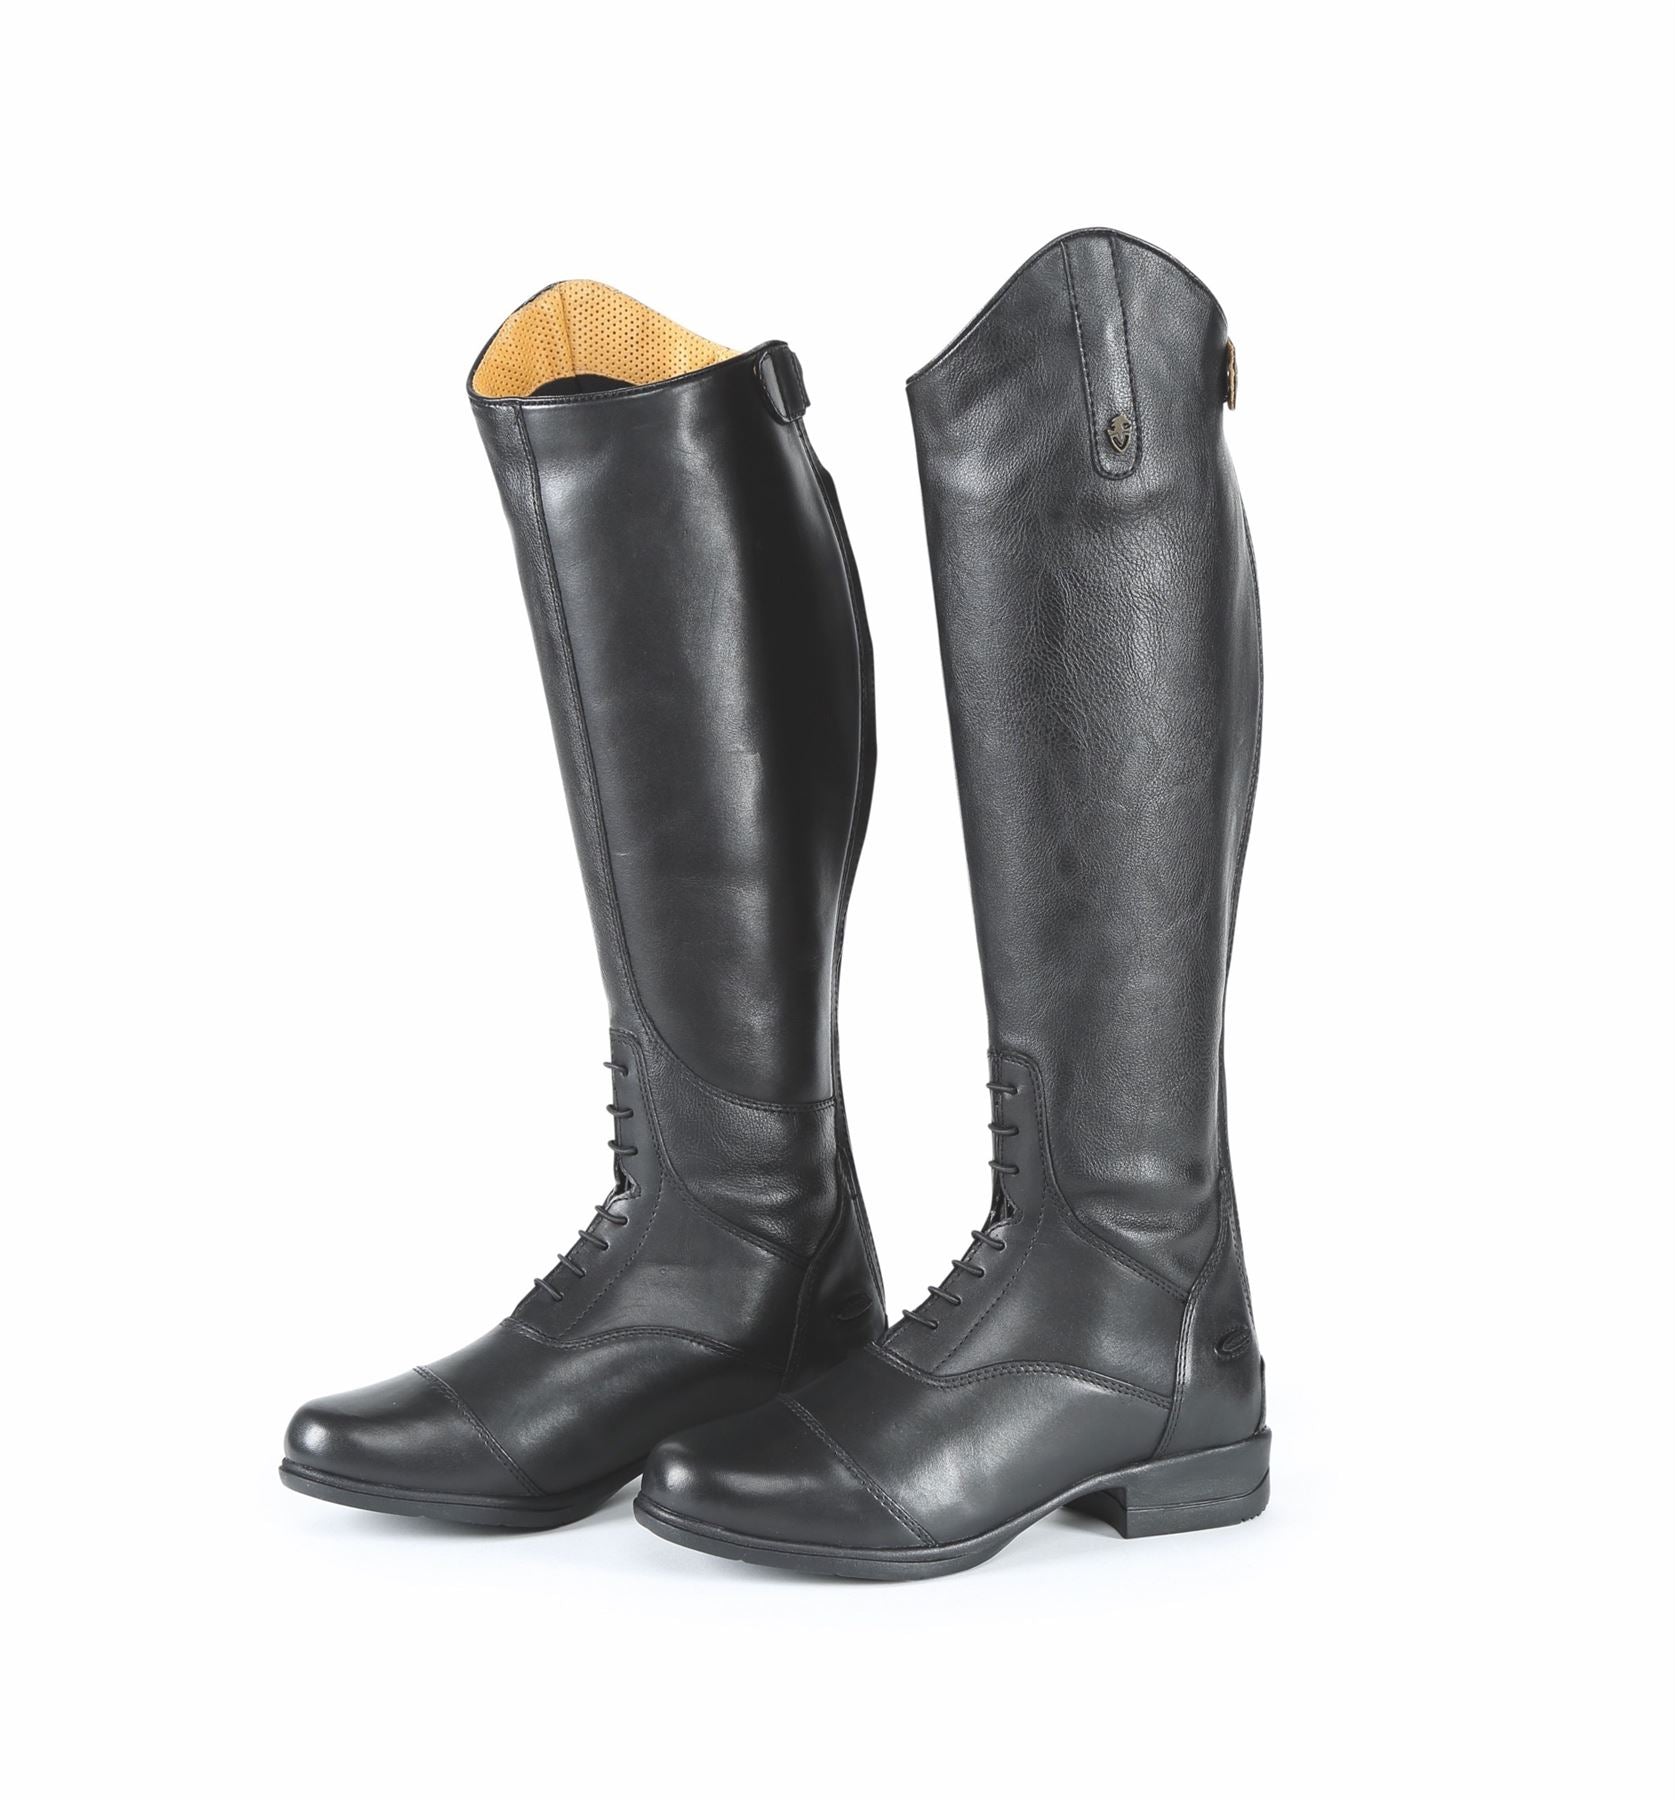 Shires Moretta Gianna Riding Boots - Child - Just Horse Riders